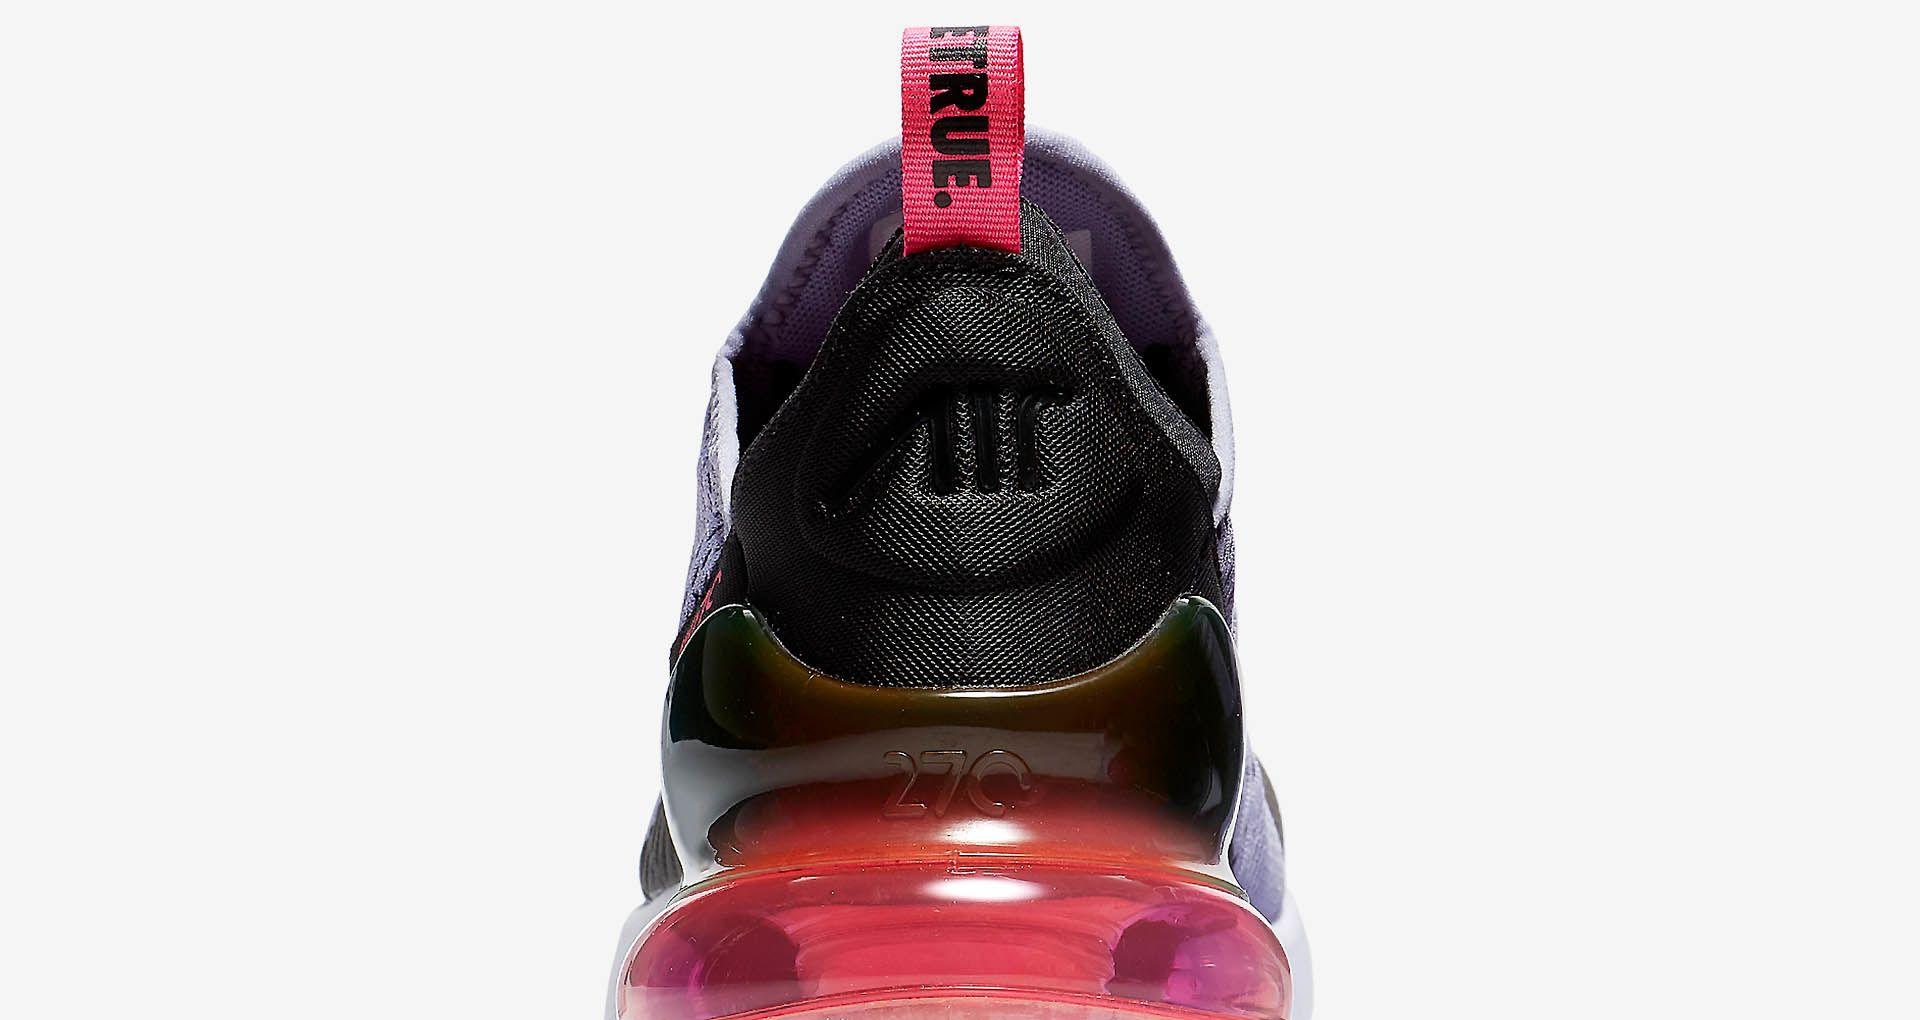 Nike Air Max 270 Betrue 'Multicolor' Release Date. Nike SNKRS